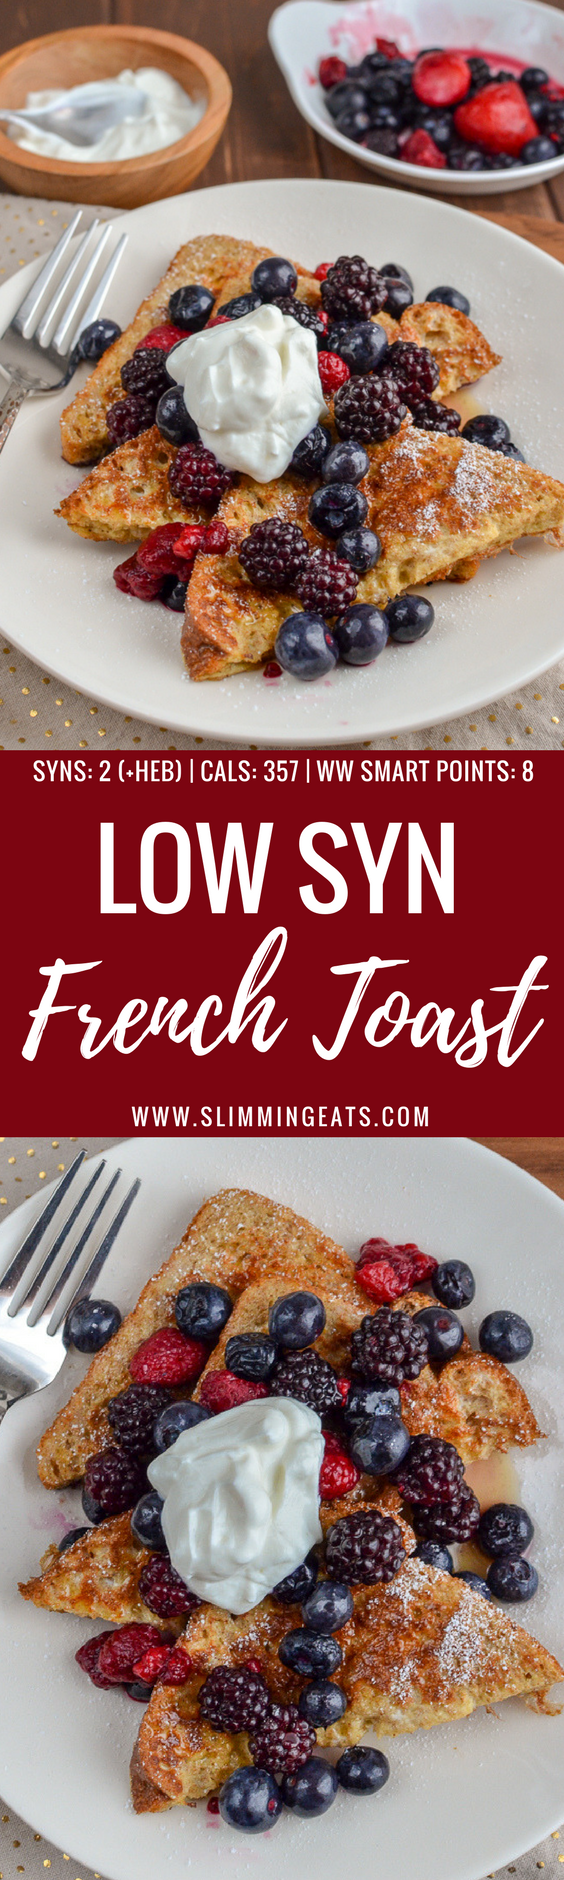 Perfect Low Syn French Toast with Mixed Berries and Maple Syrup - simple ingredients for a delicious quick and easy breakfast - dairy free, vegetarian, Slimming World and Weight Watchers friendly | www.slimmingeats.com